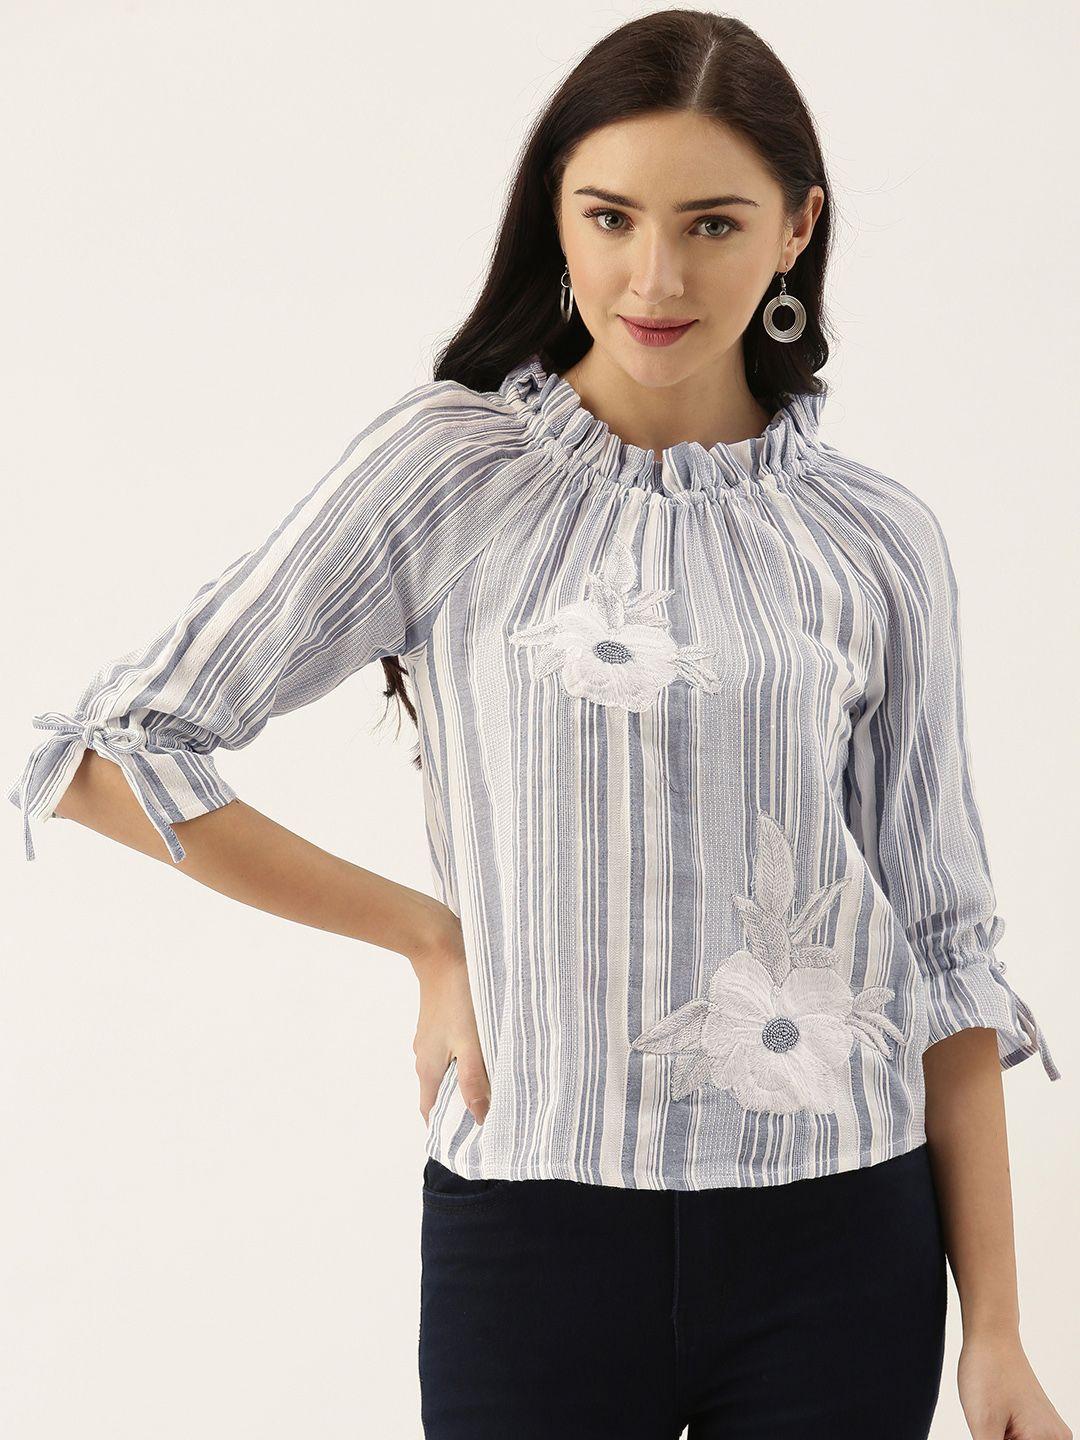 saanjh grey & white striped pure cotton regular top